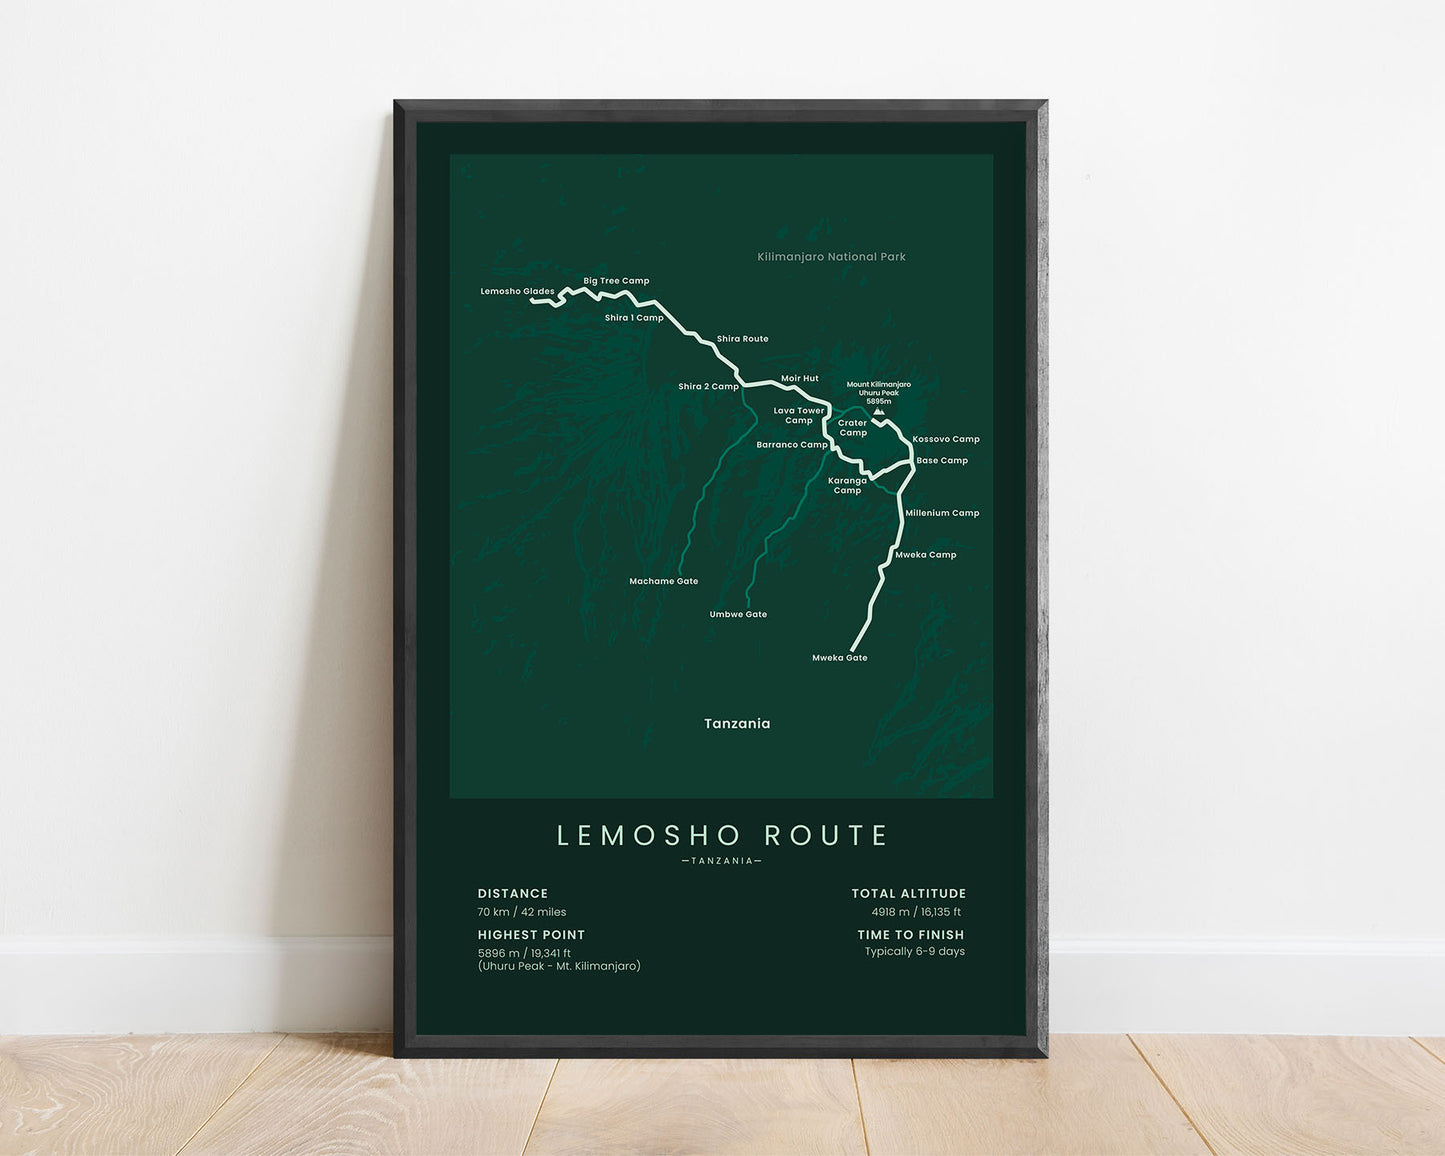 Lemosho Route (Tanzania) Track Poster with Green Background